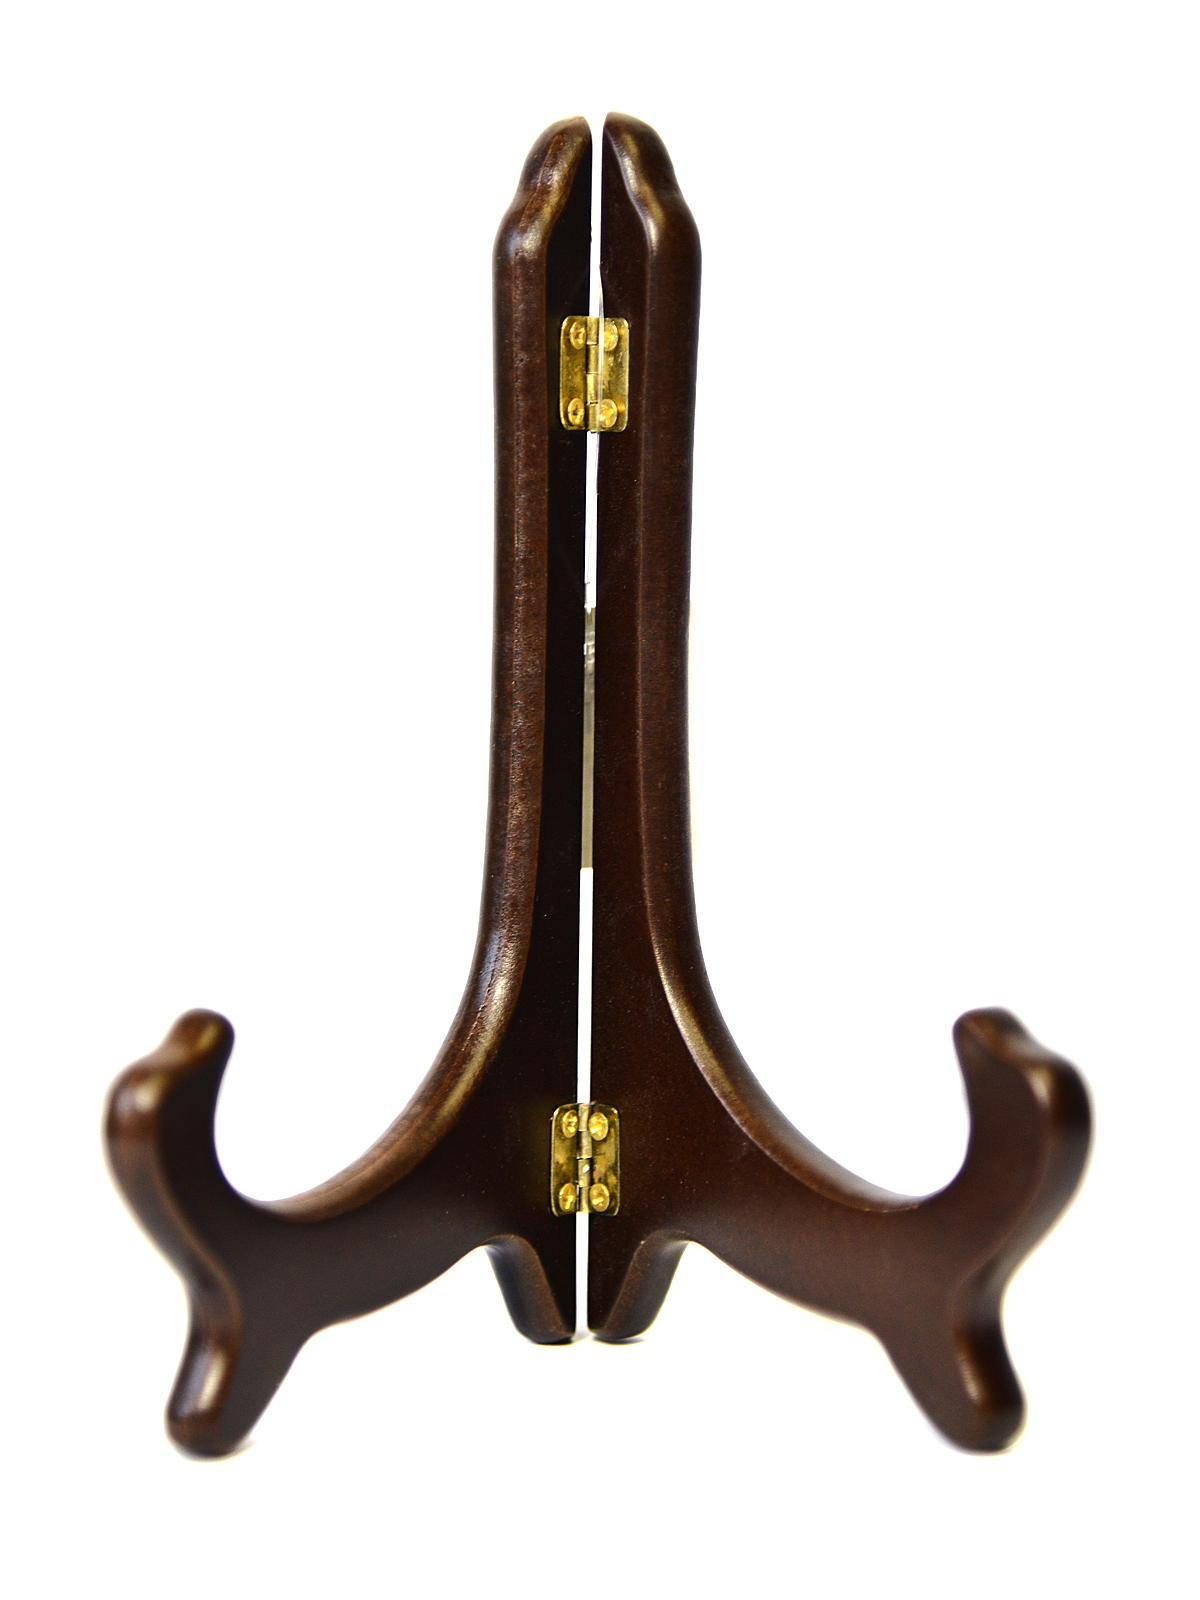 Display Stands Walnut Wood 7 In.